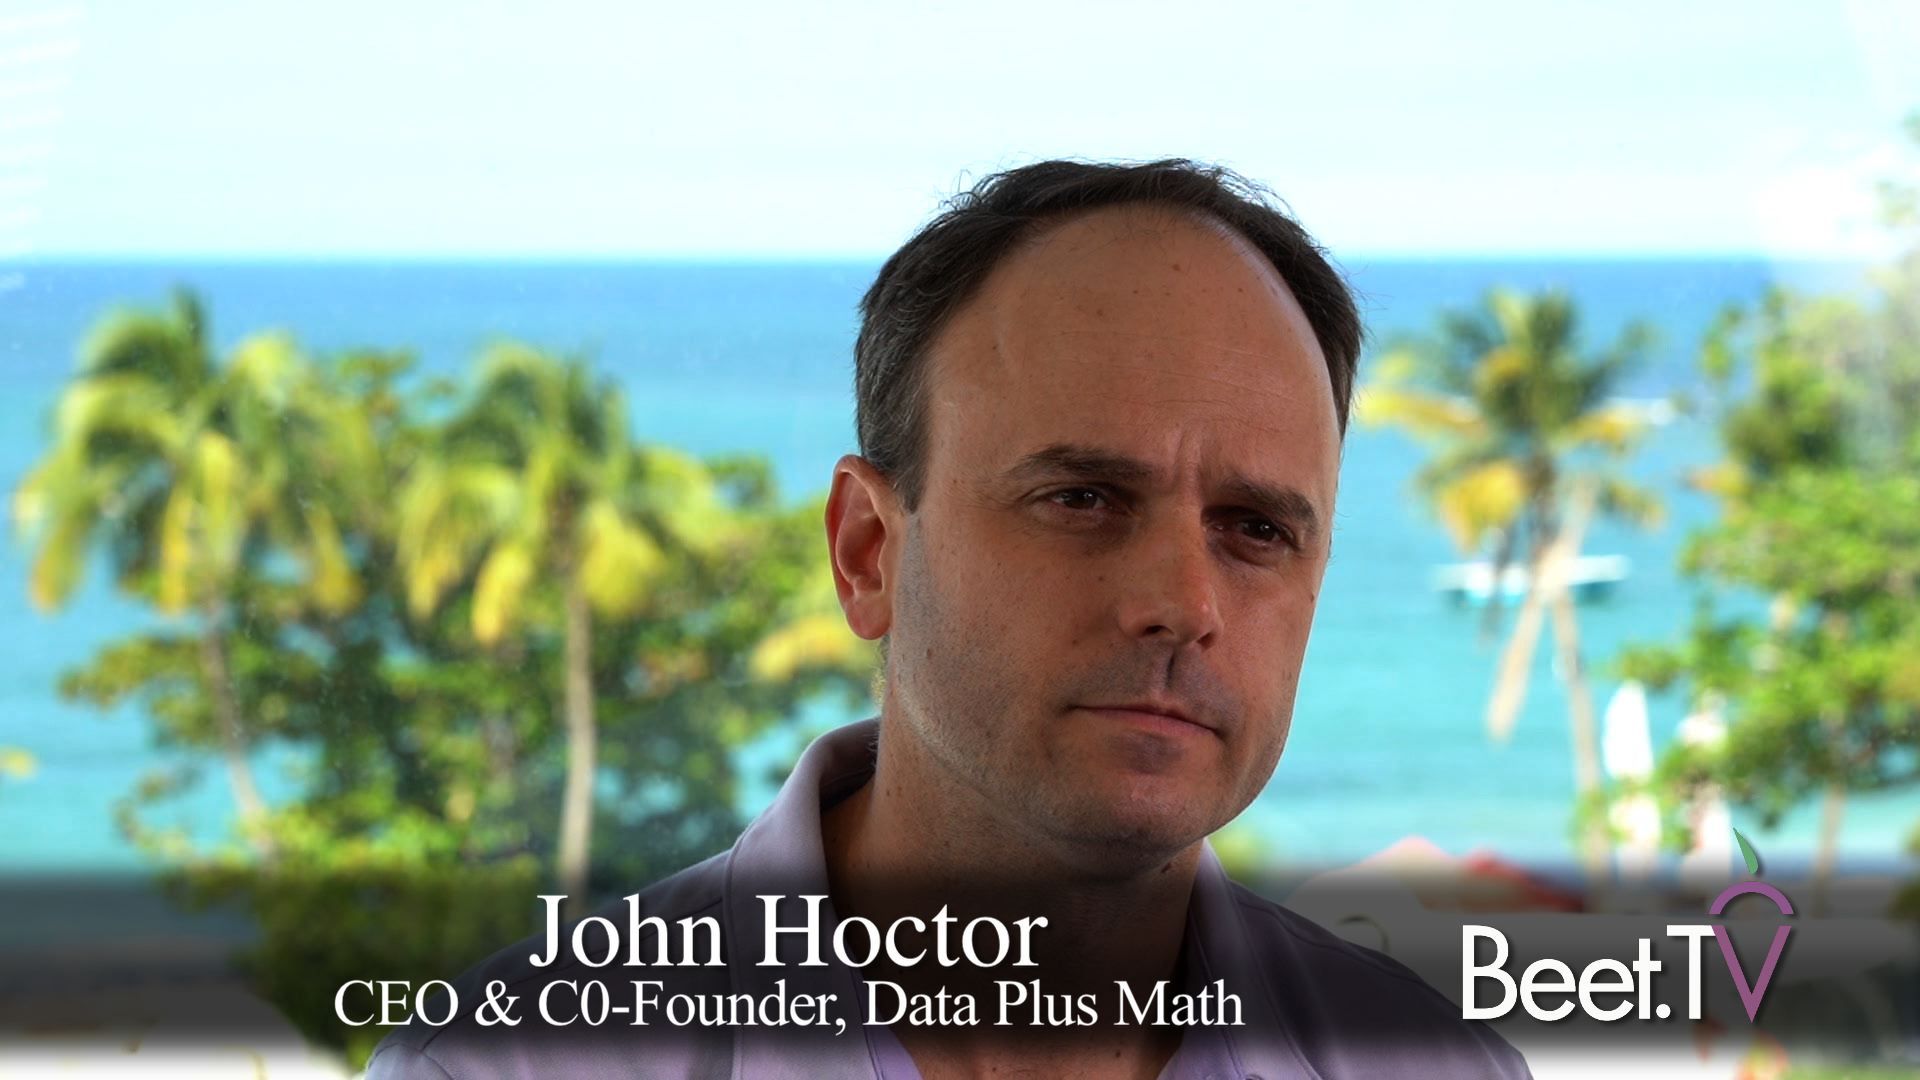 Data Plus Math Seeks To Provide Fast, Low-Cost TV Attribution